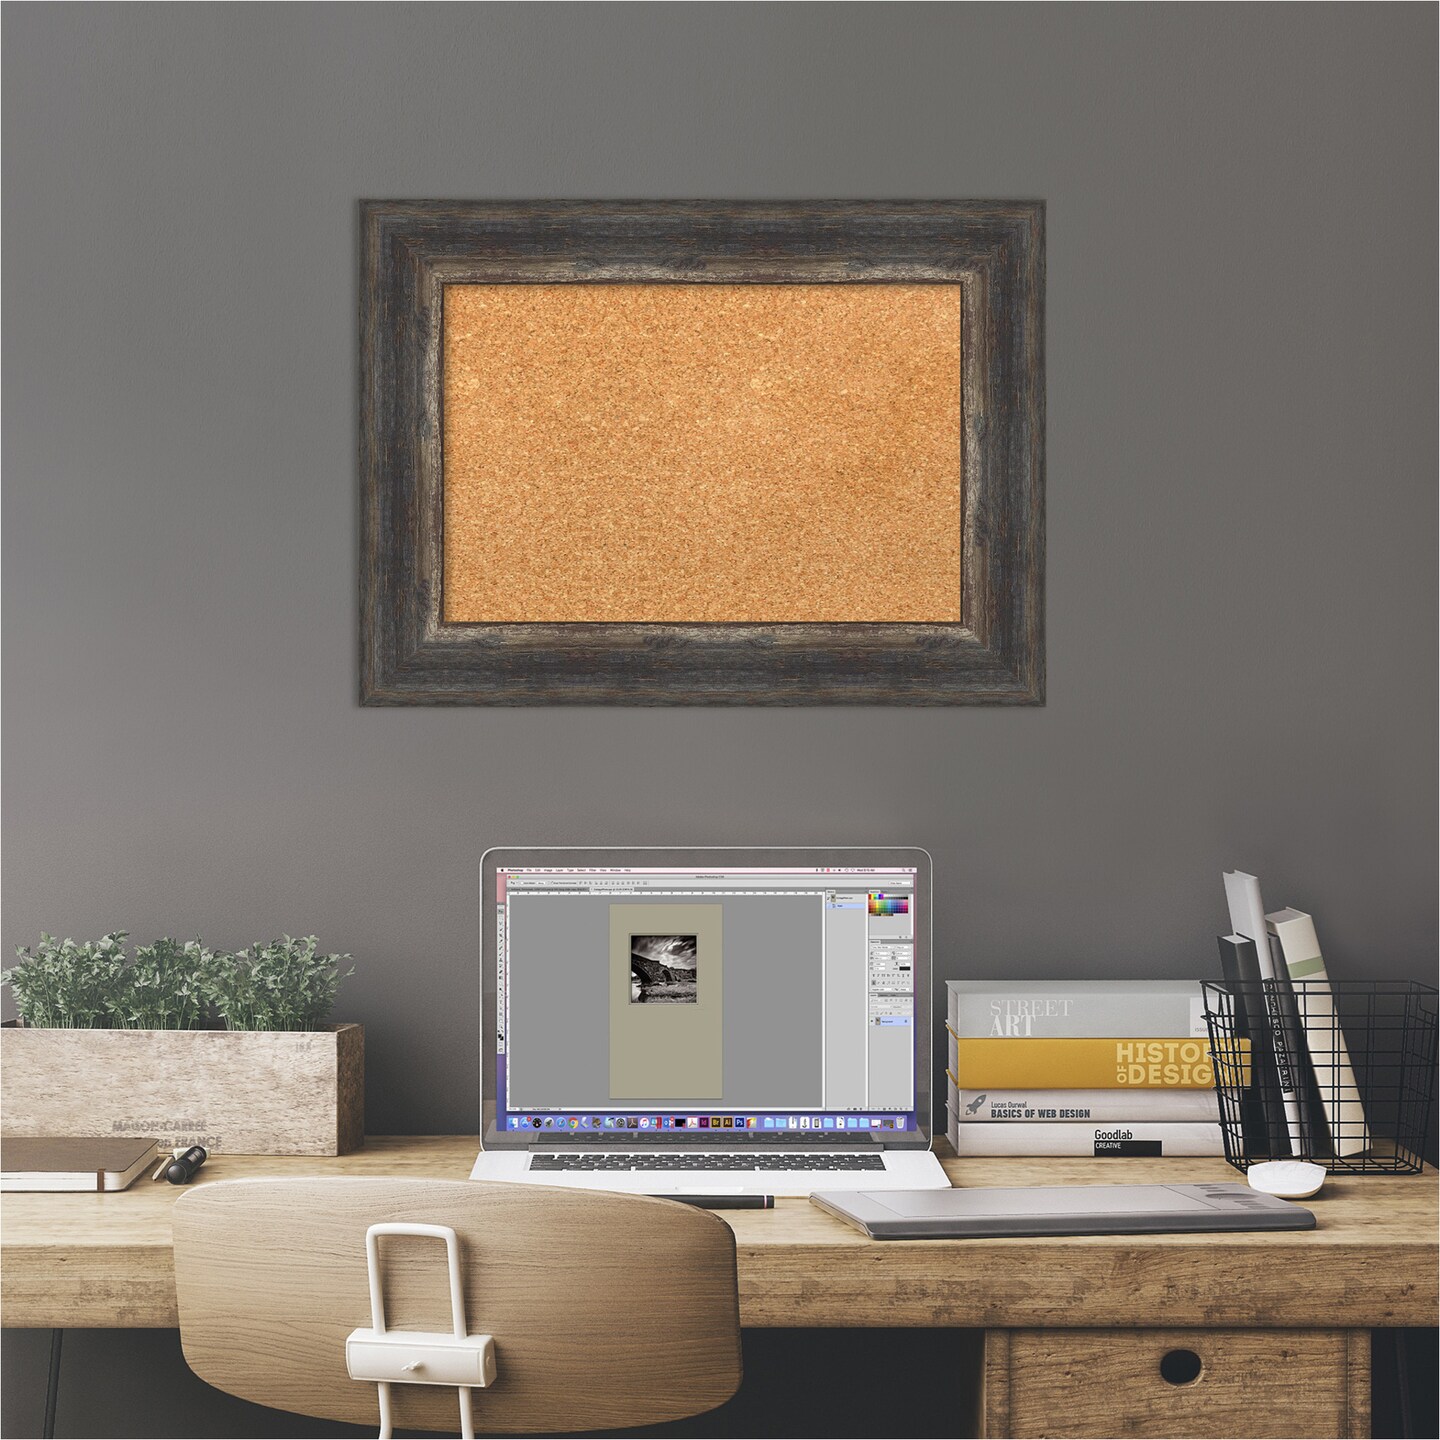 Framed Cork Board from a Picture Frame for Home Office Decor